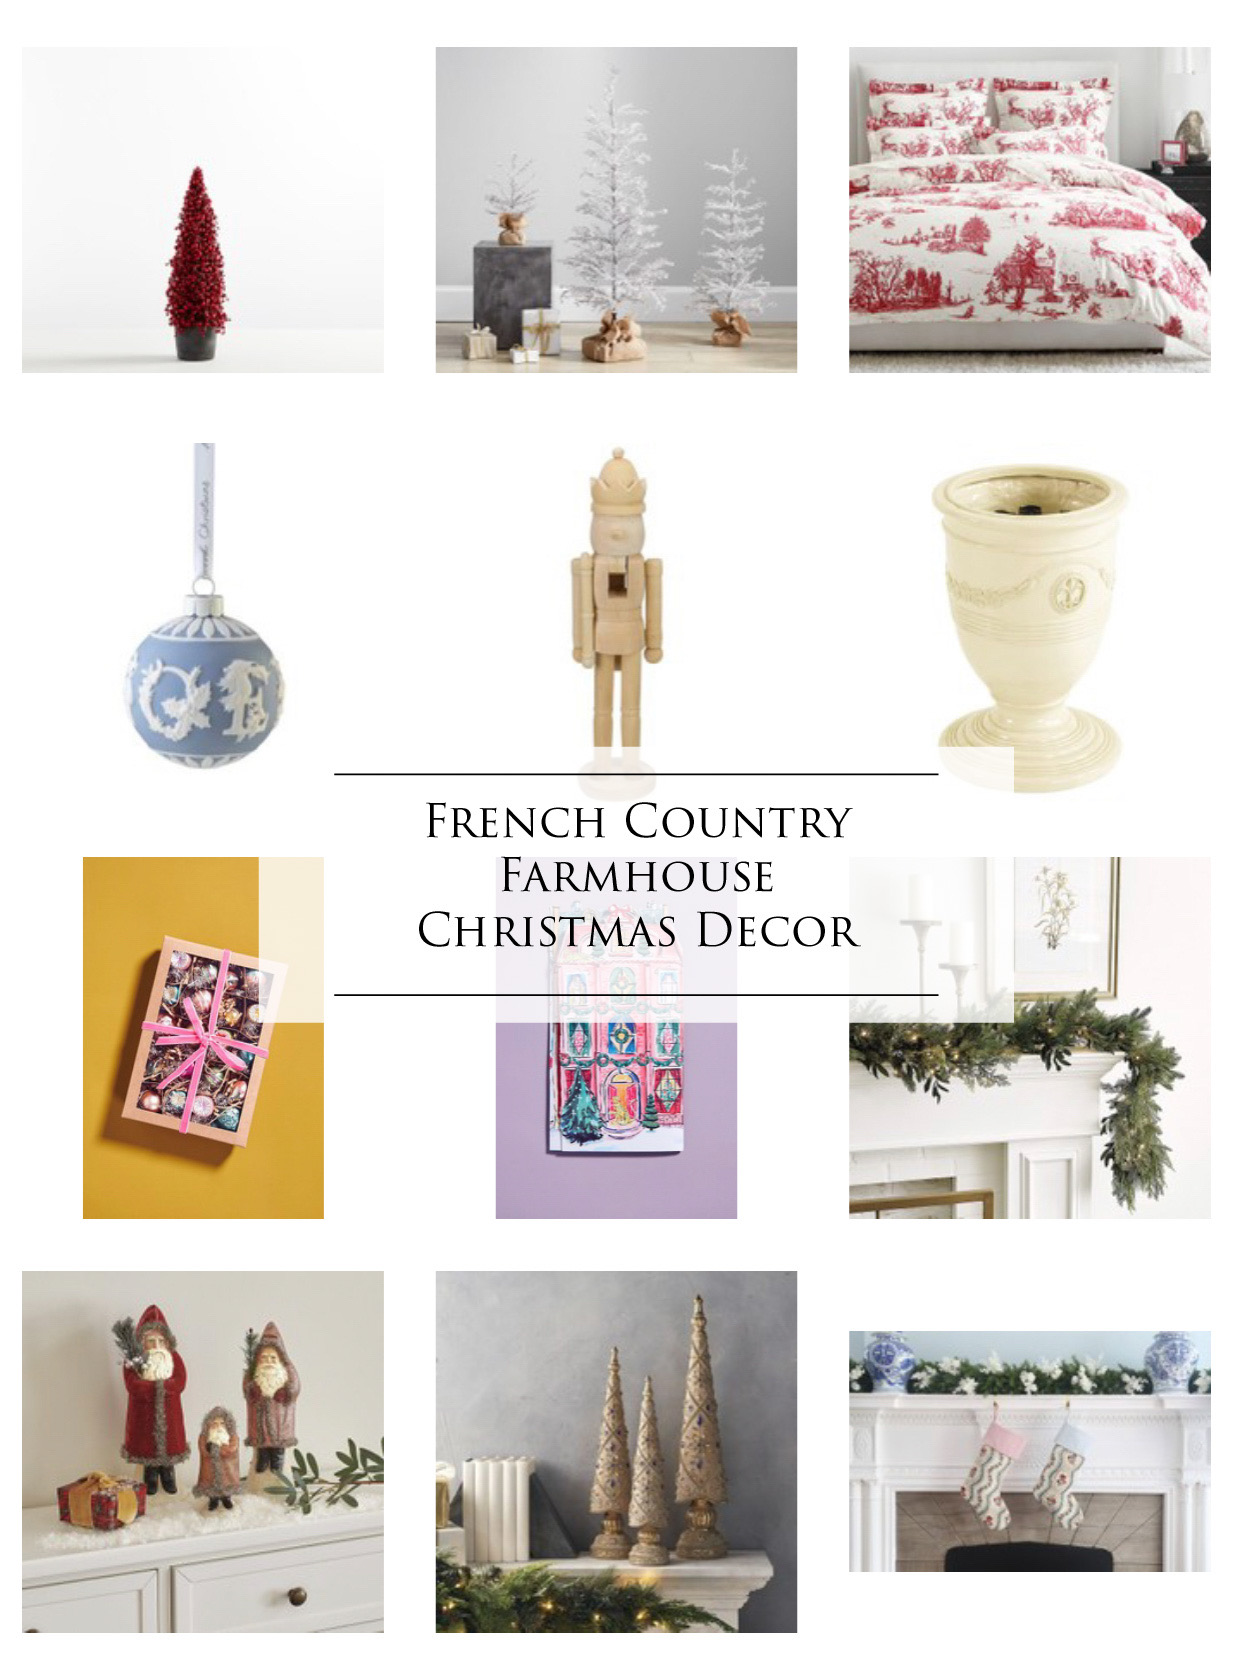 French Country Christmas Decor!